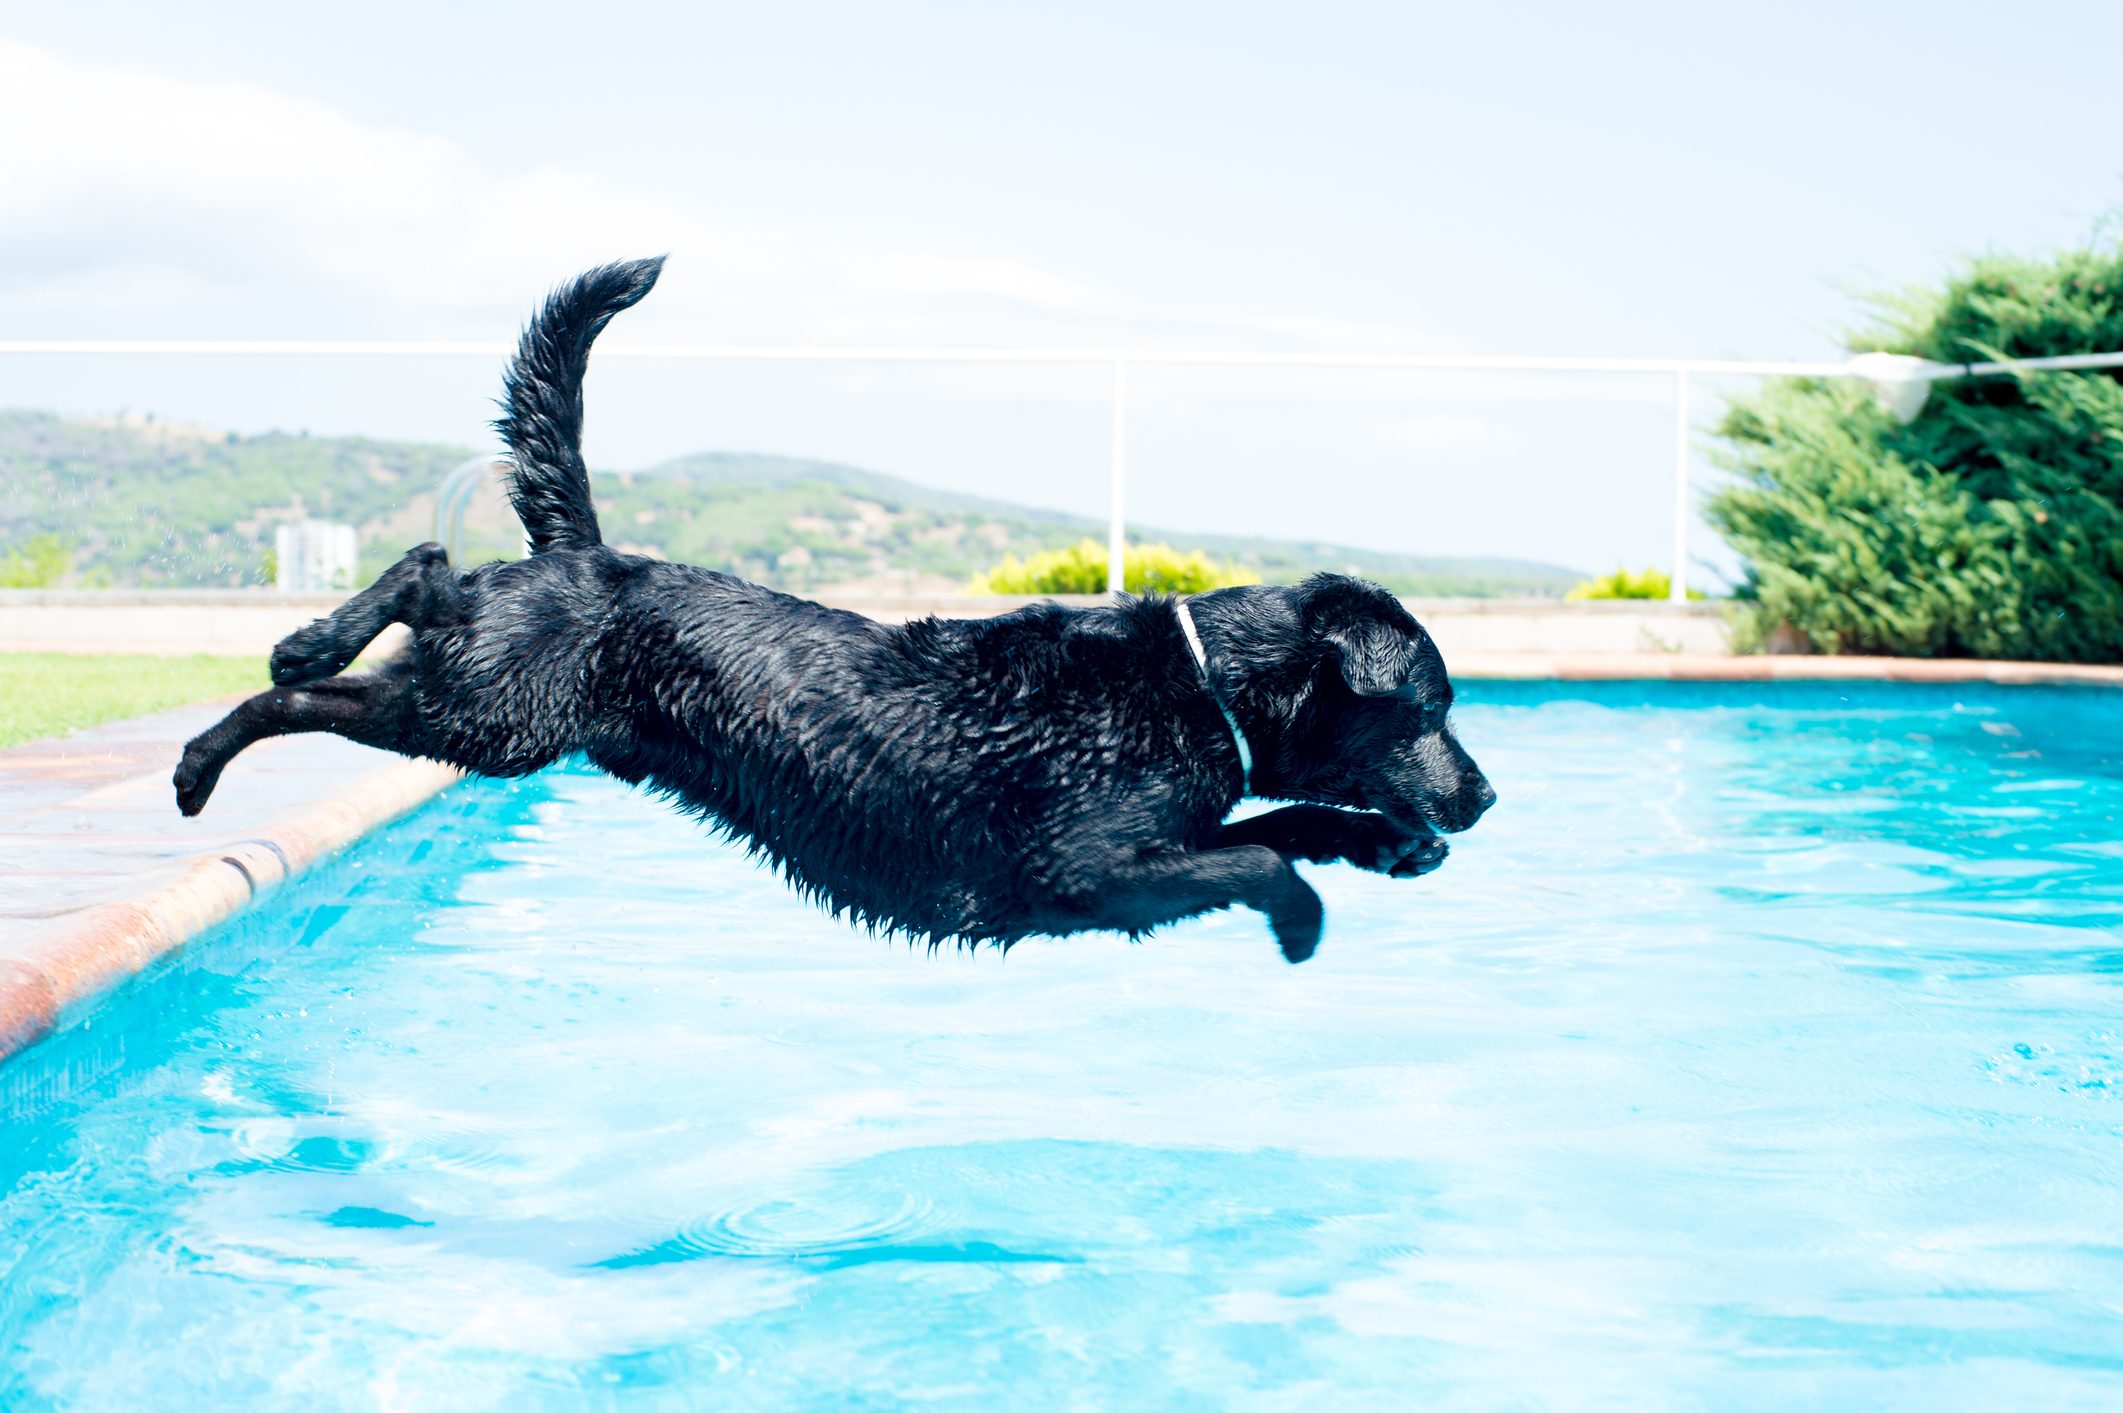 A black dog in the pool